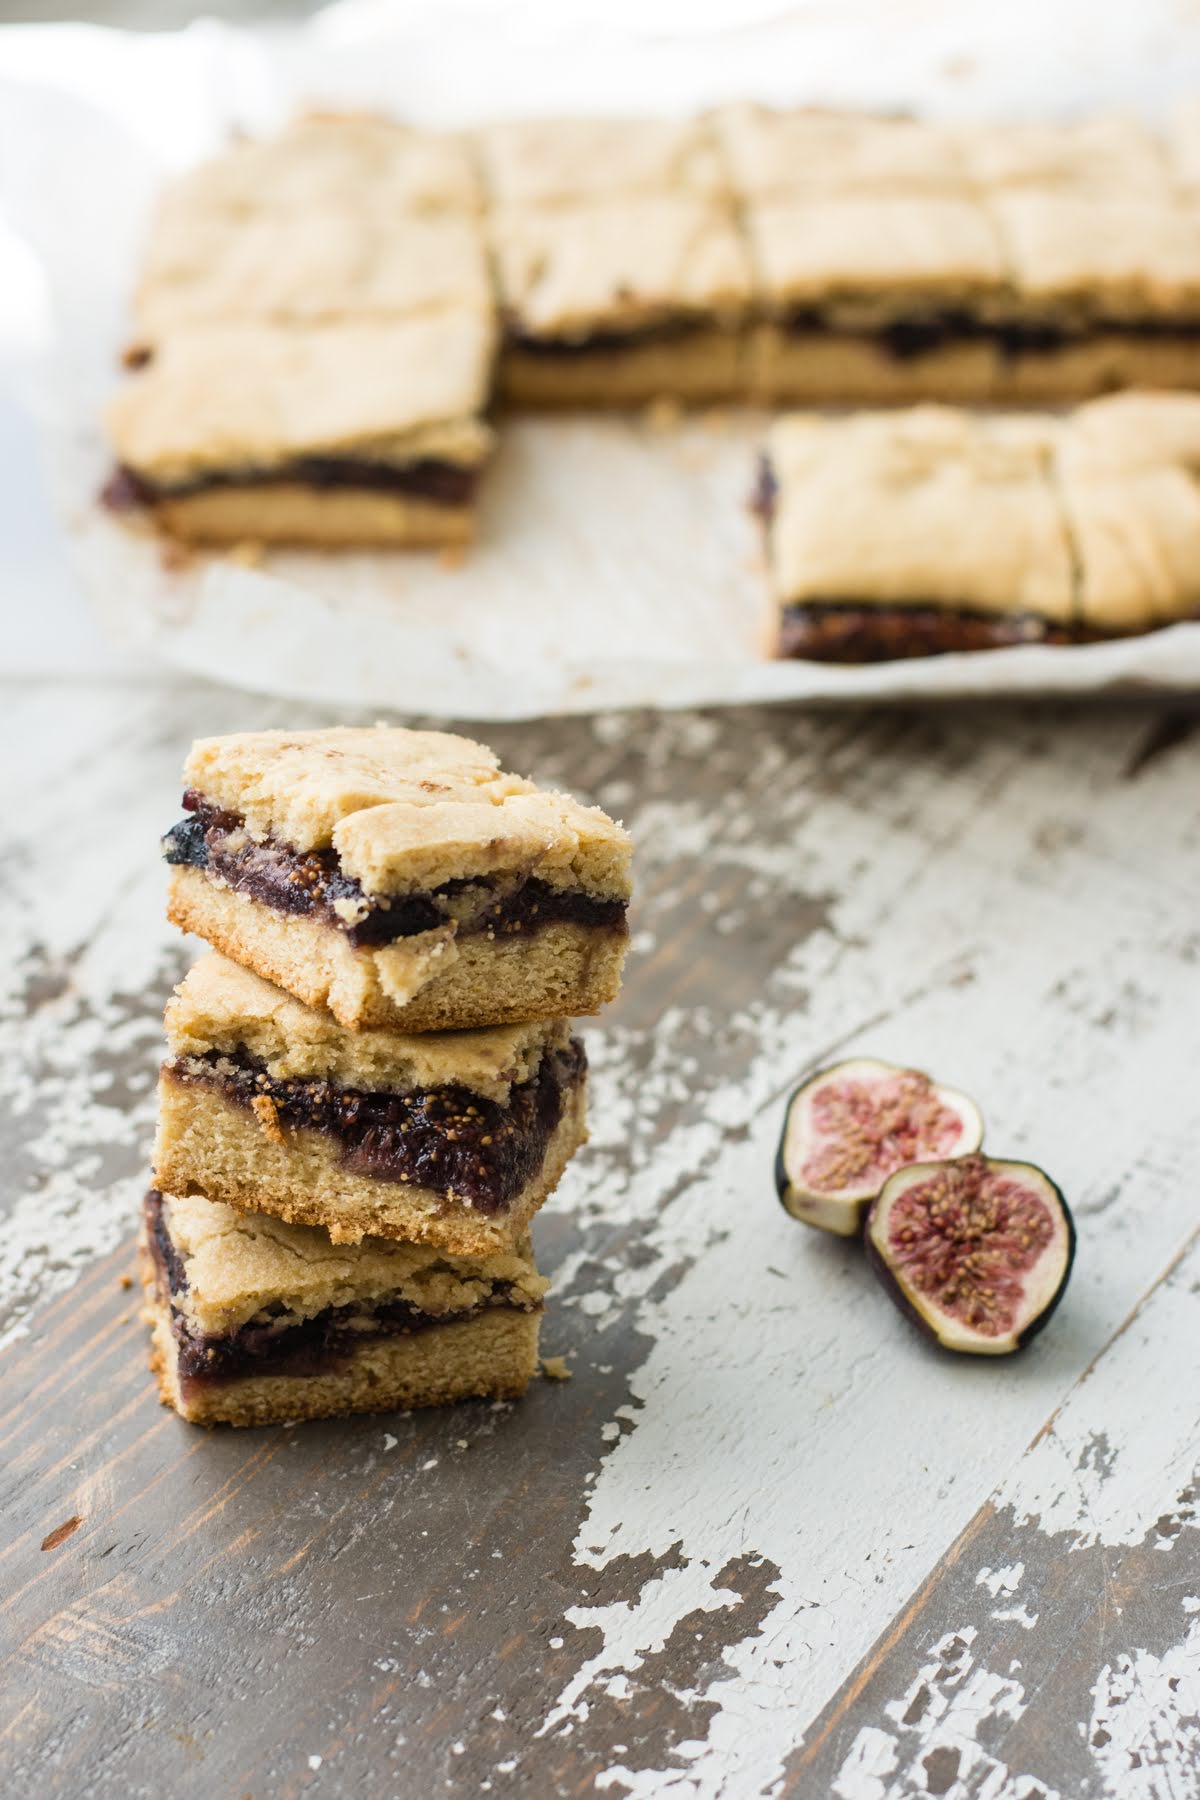 Homemade fig bars stacked up in front of the rest of the batch. A halved fig lies nearby.